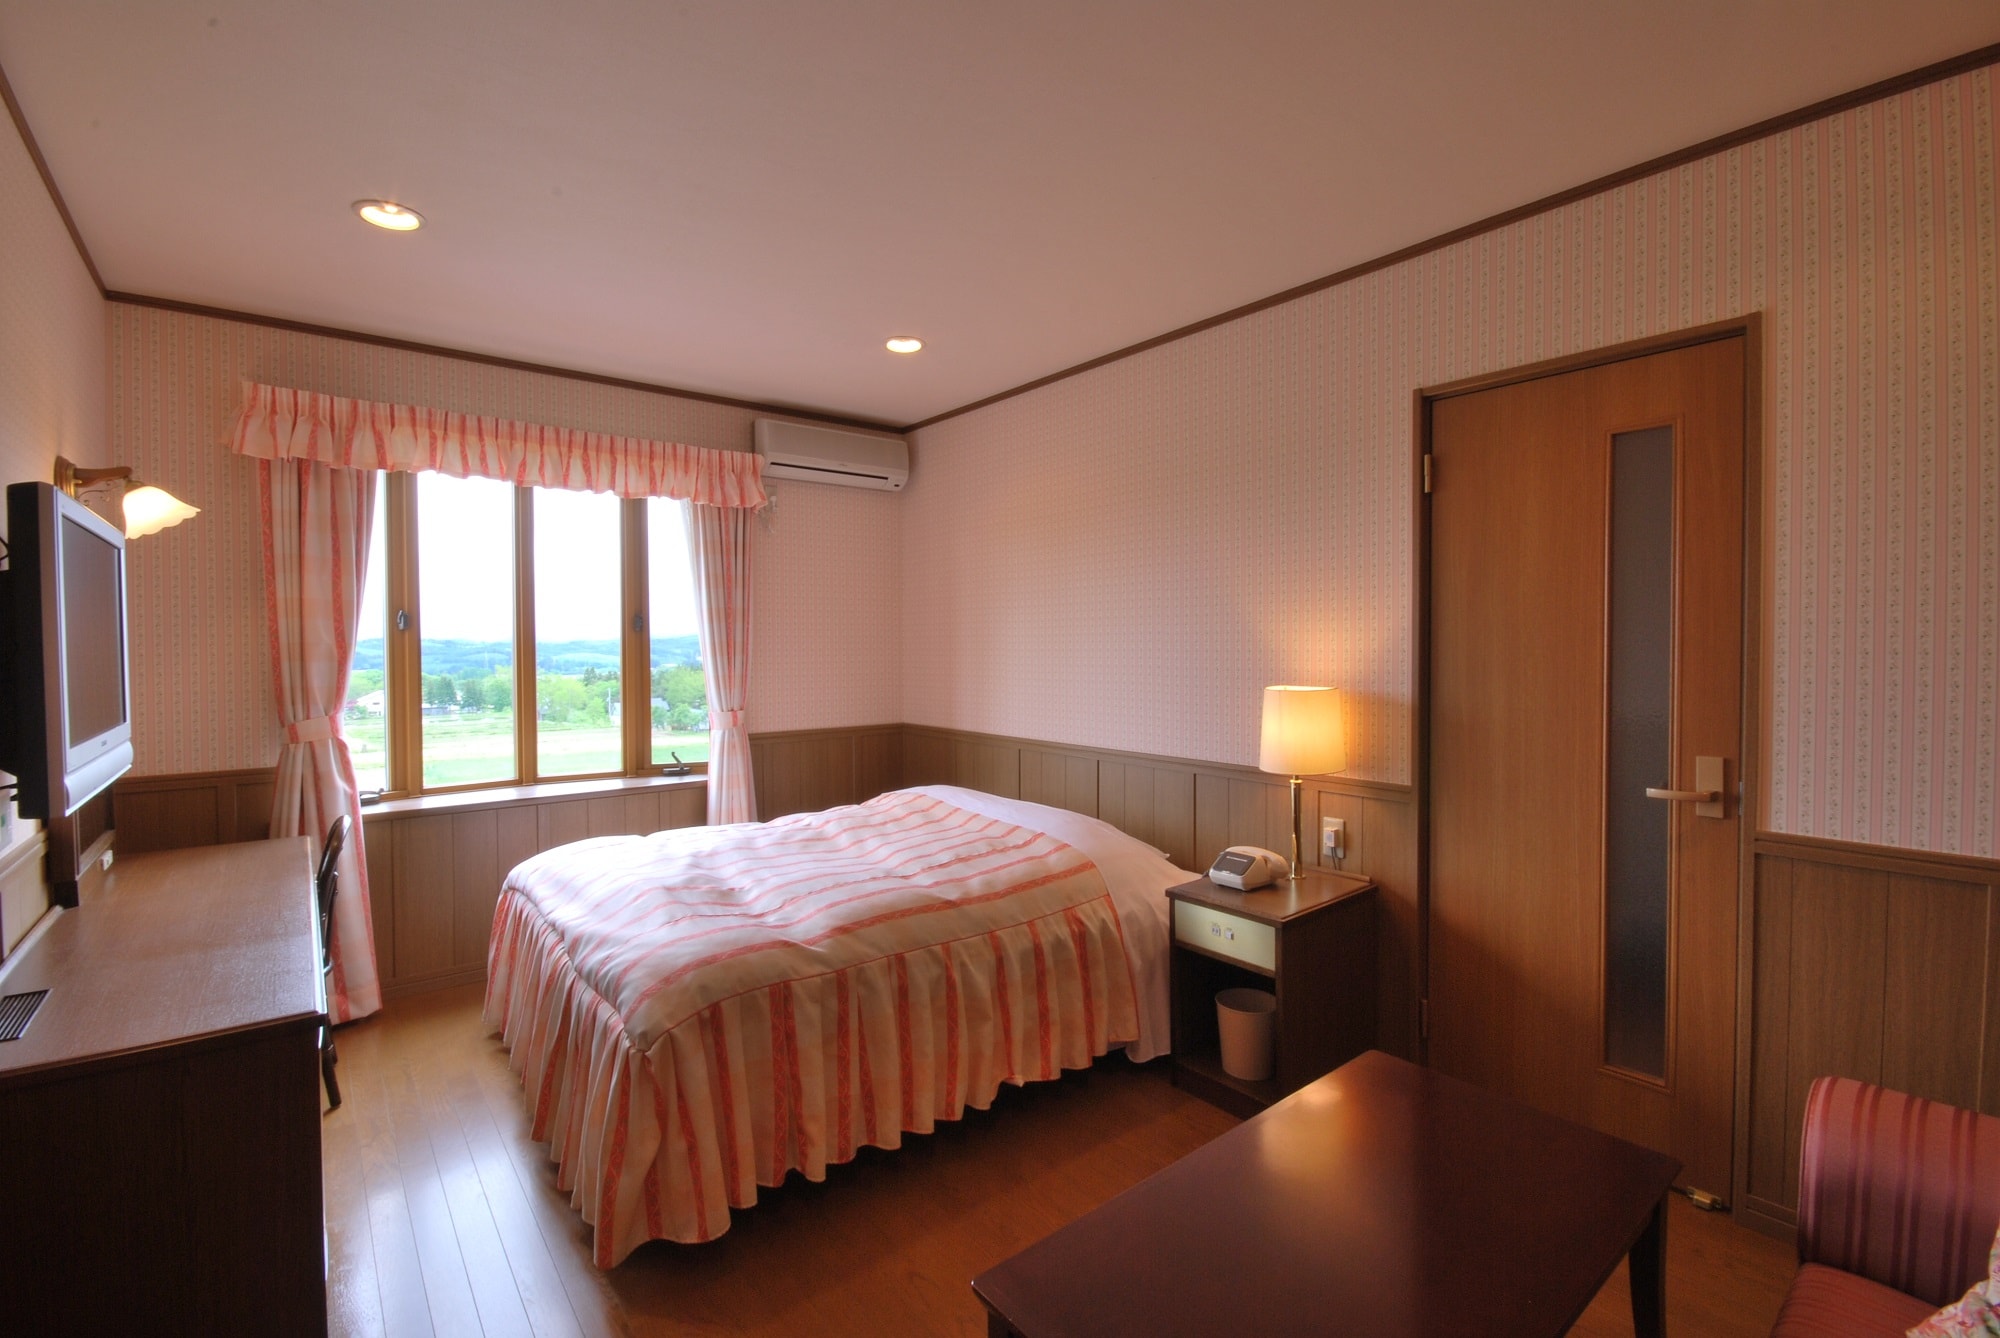 [Guest room with cypress bath with a view of the annex] Double room with a cypress bath with a view of Lake Inawashiro in the distance ♪